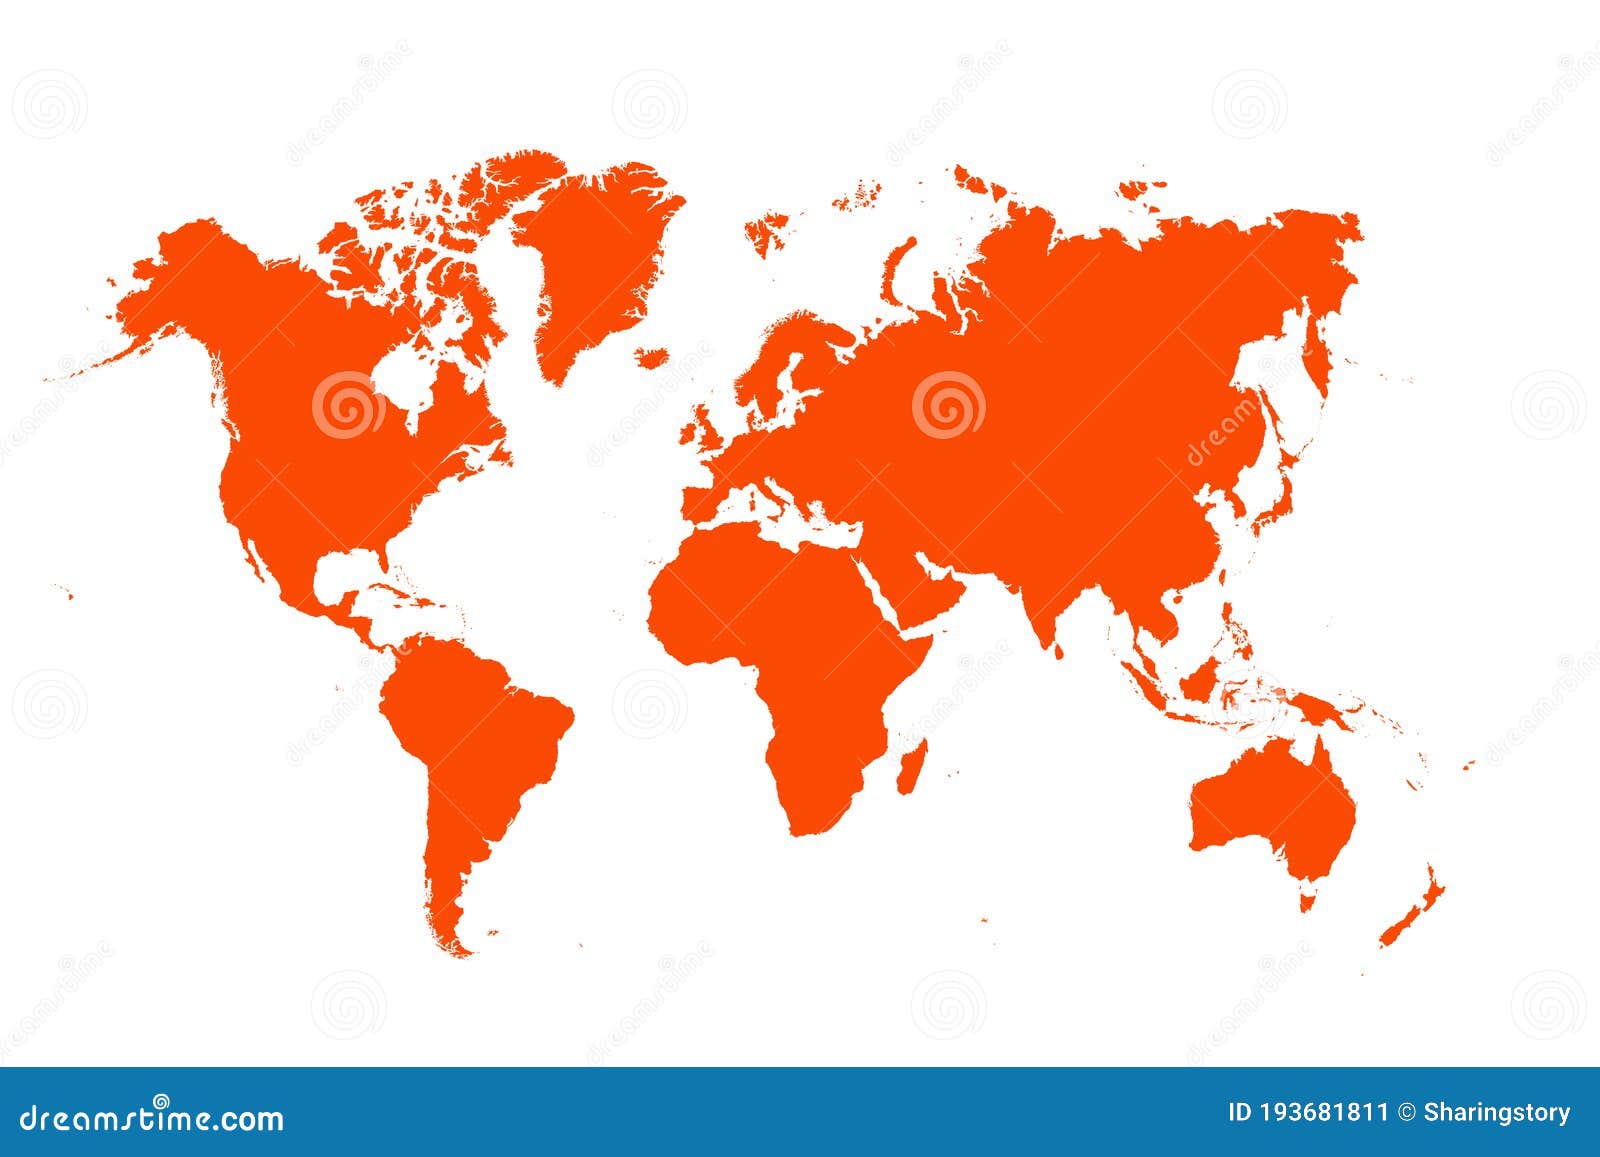 Red Map of the World ,Silhouette Background Stock Illustration ...